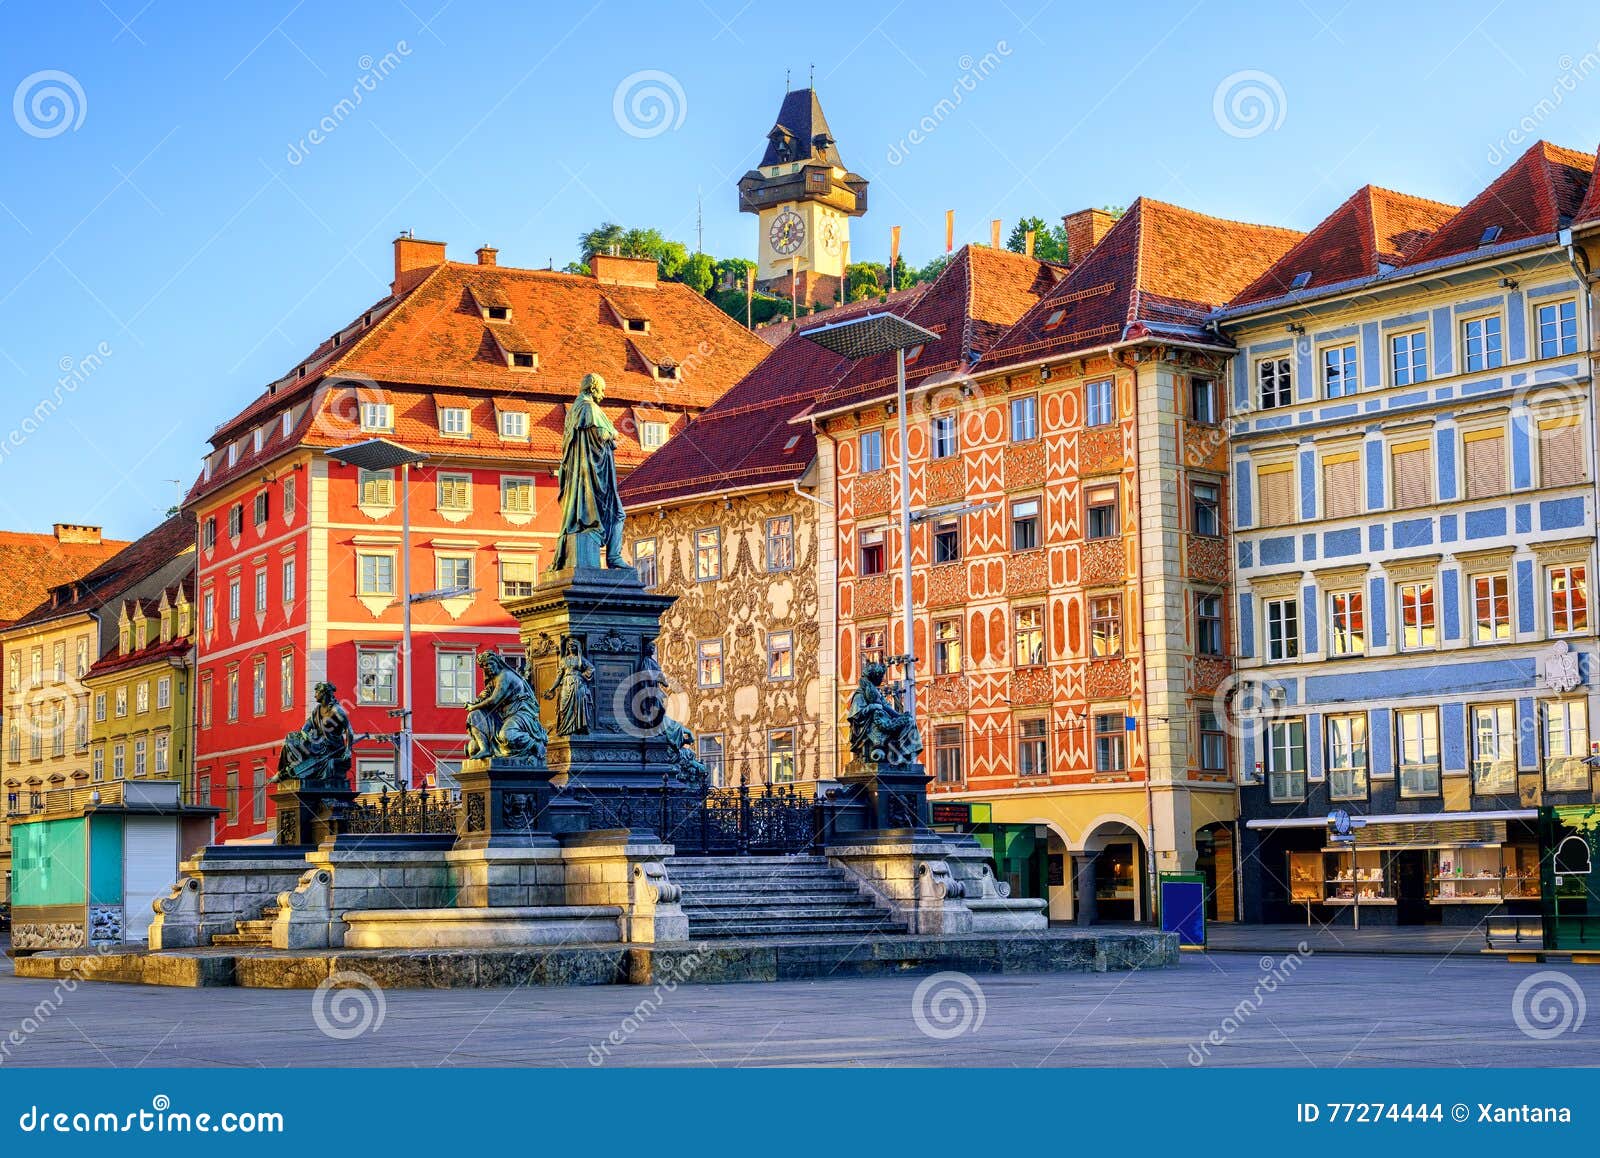 central square in the old town of graz, austria